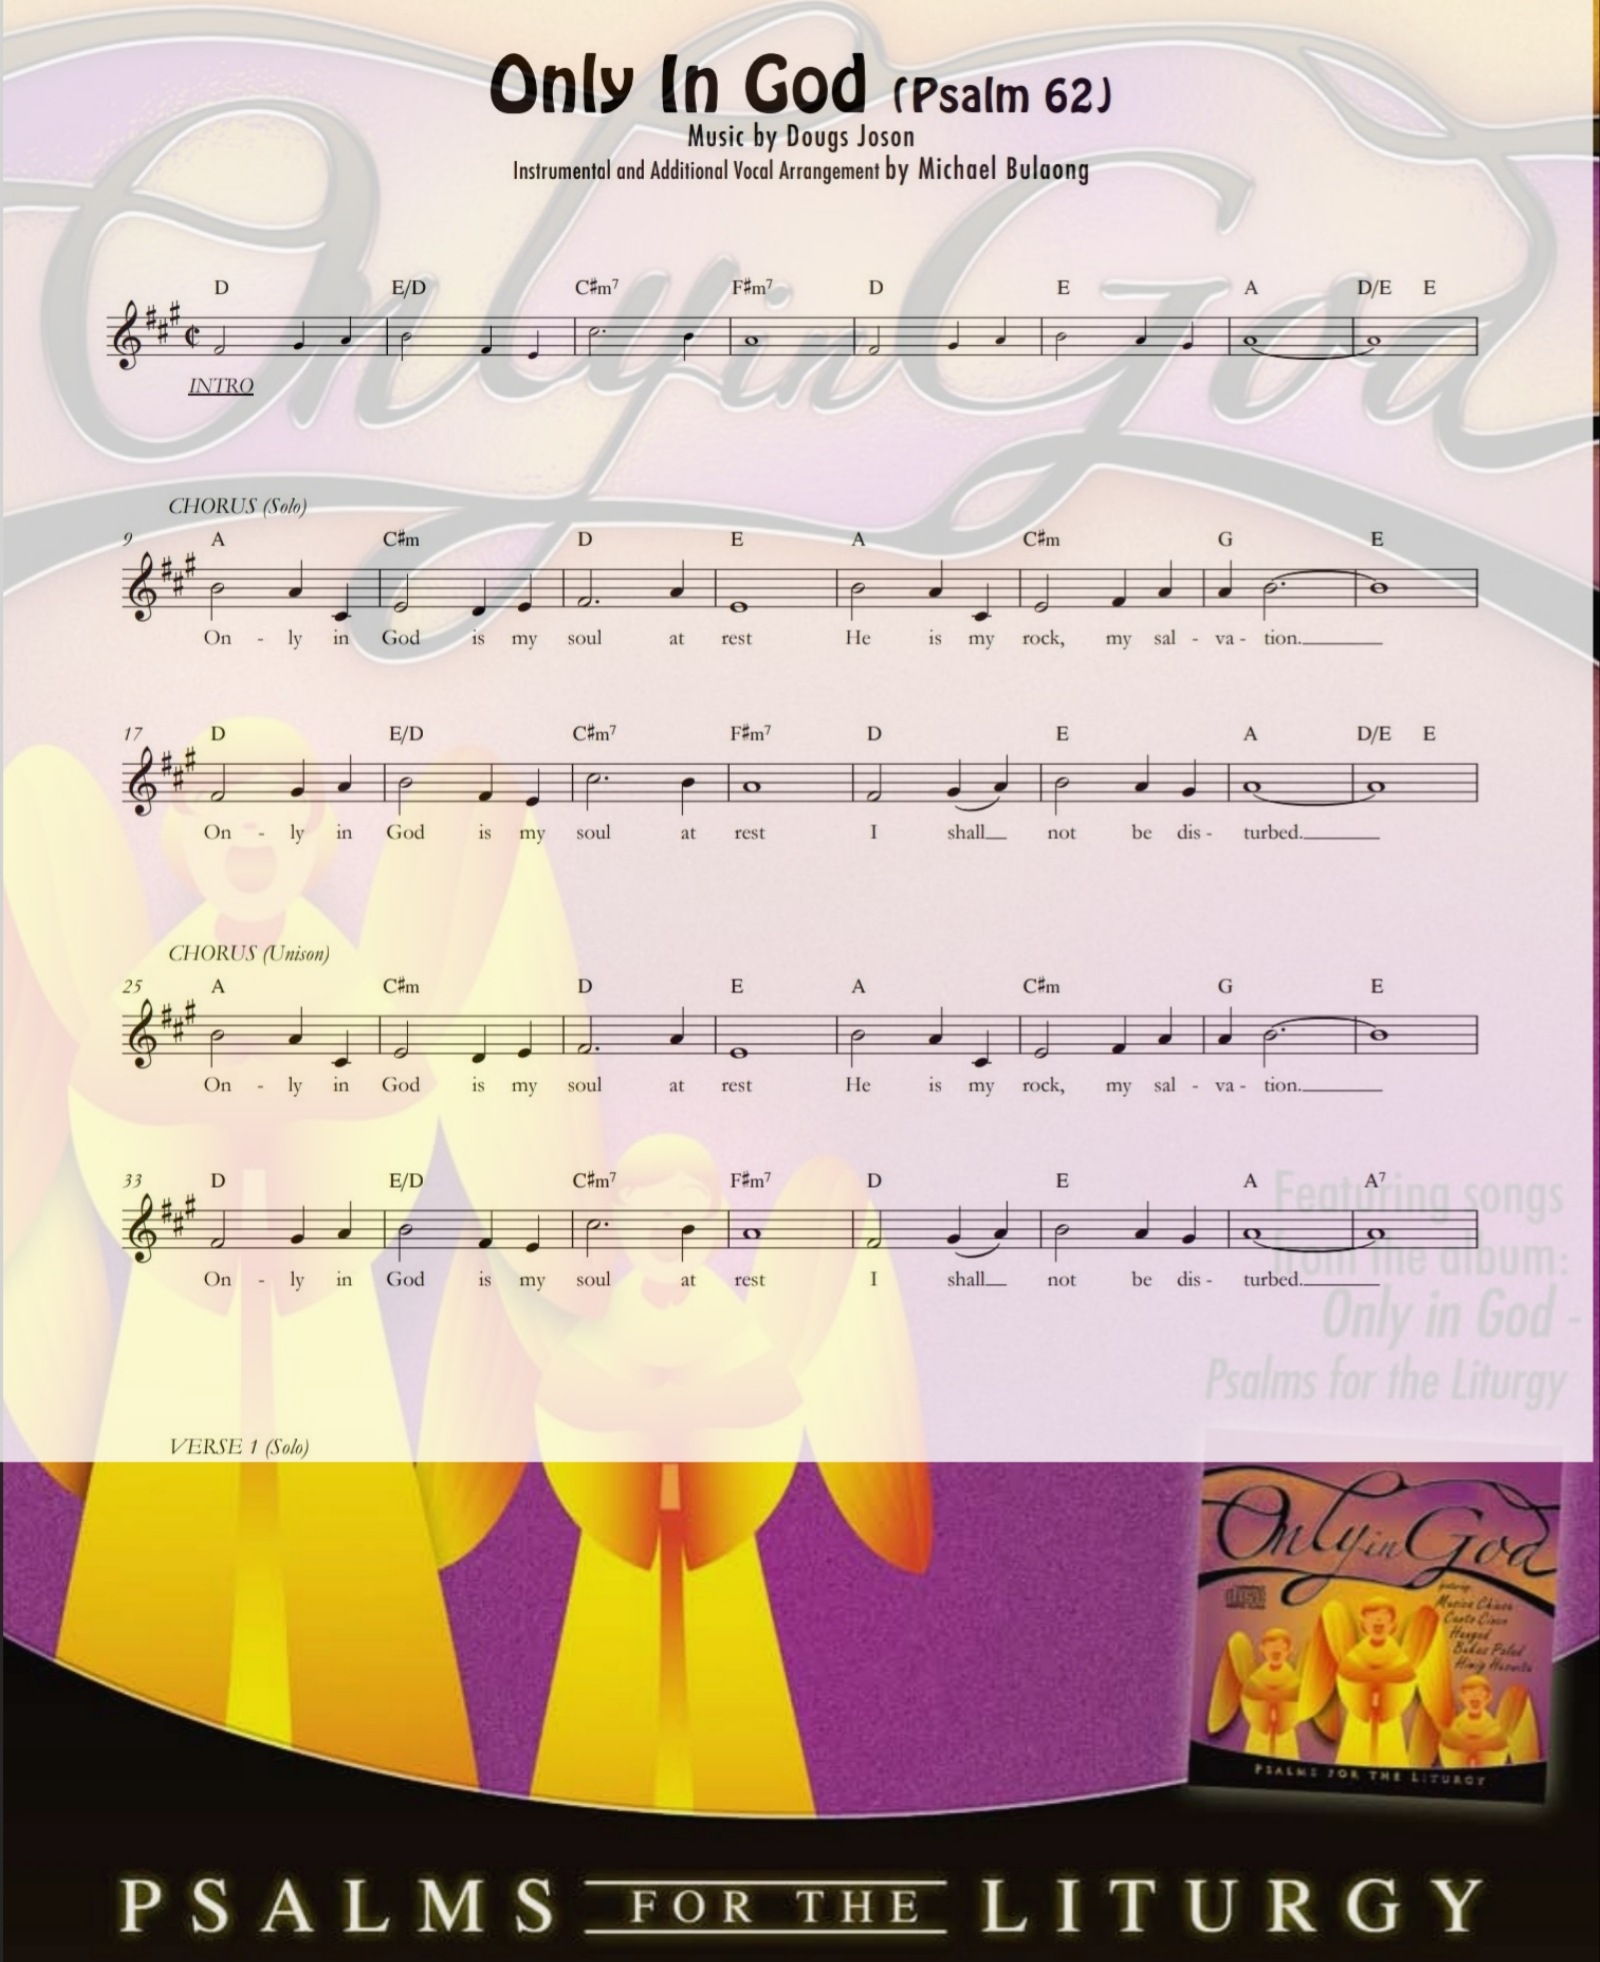 ONLY IN GOD – Music Sheet